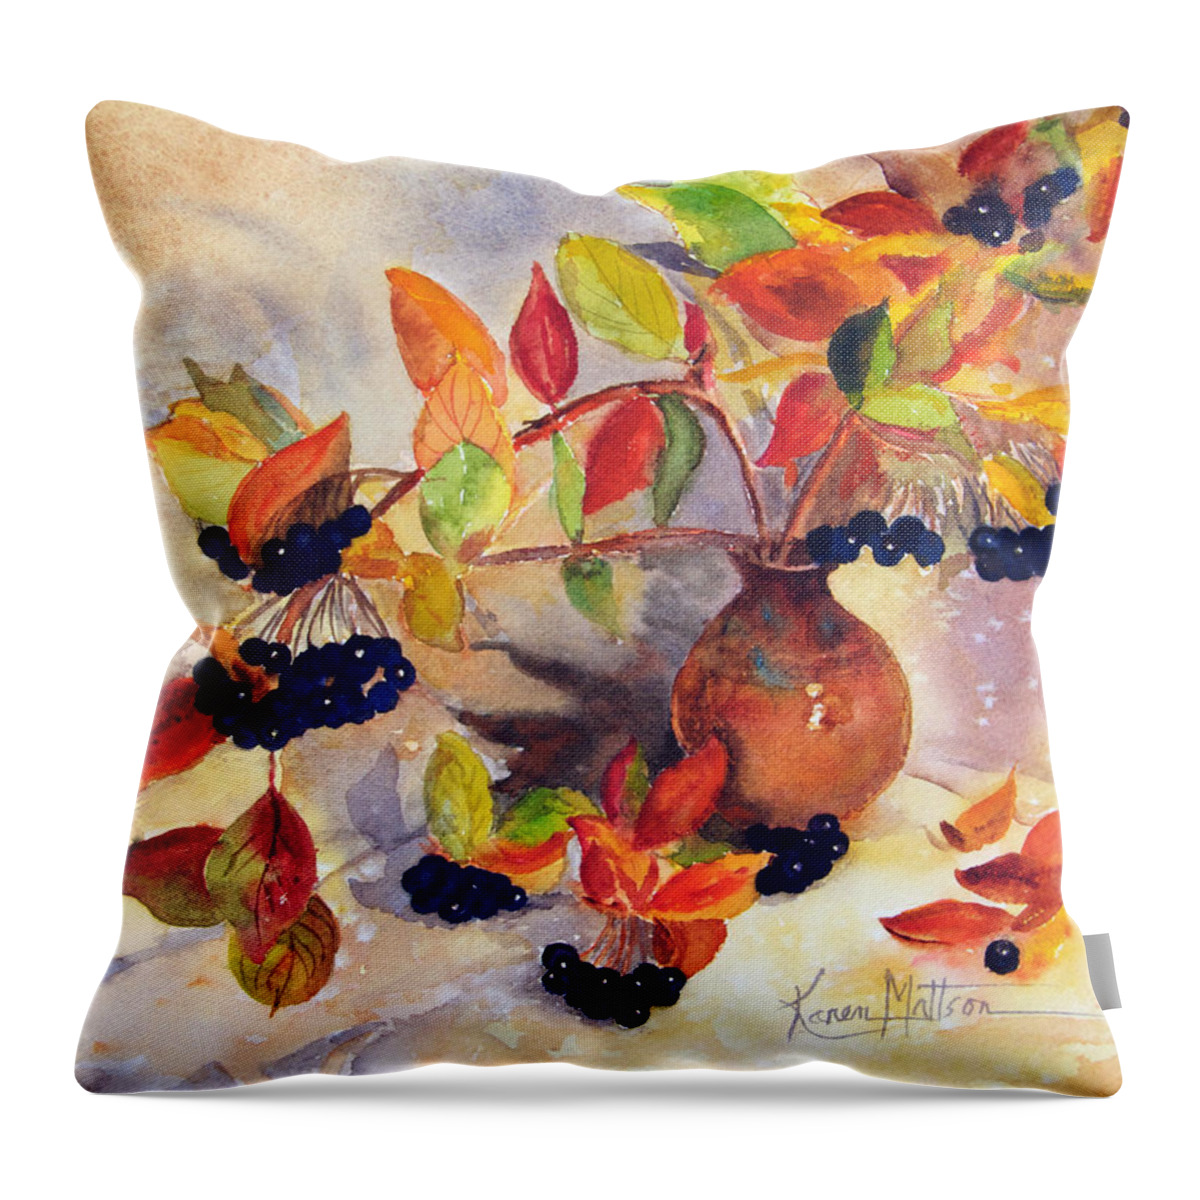 Berry Harvest Throw Pillow featuring the painting Berry Harvest Still Life by Karen Mattson